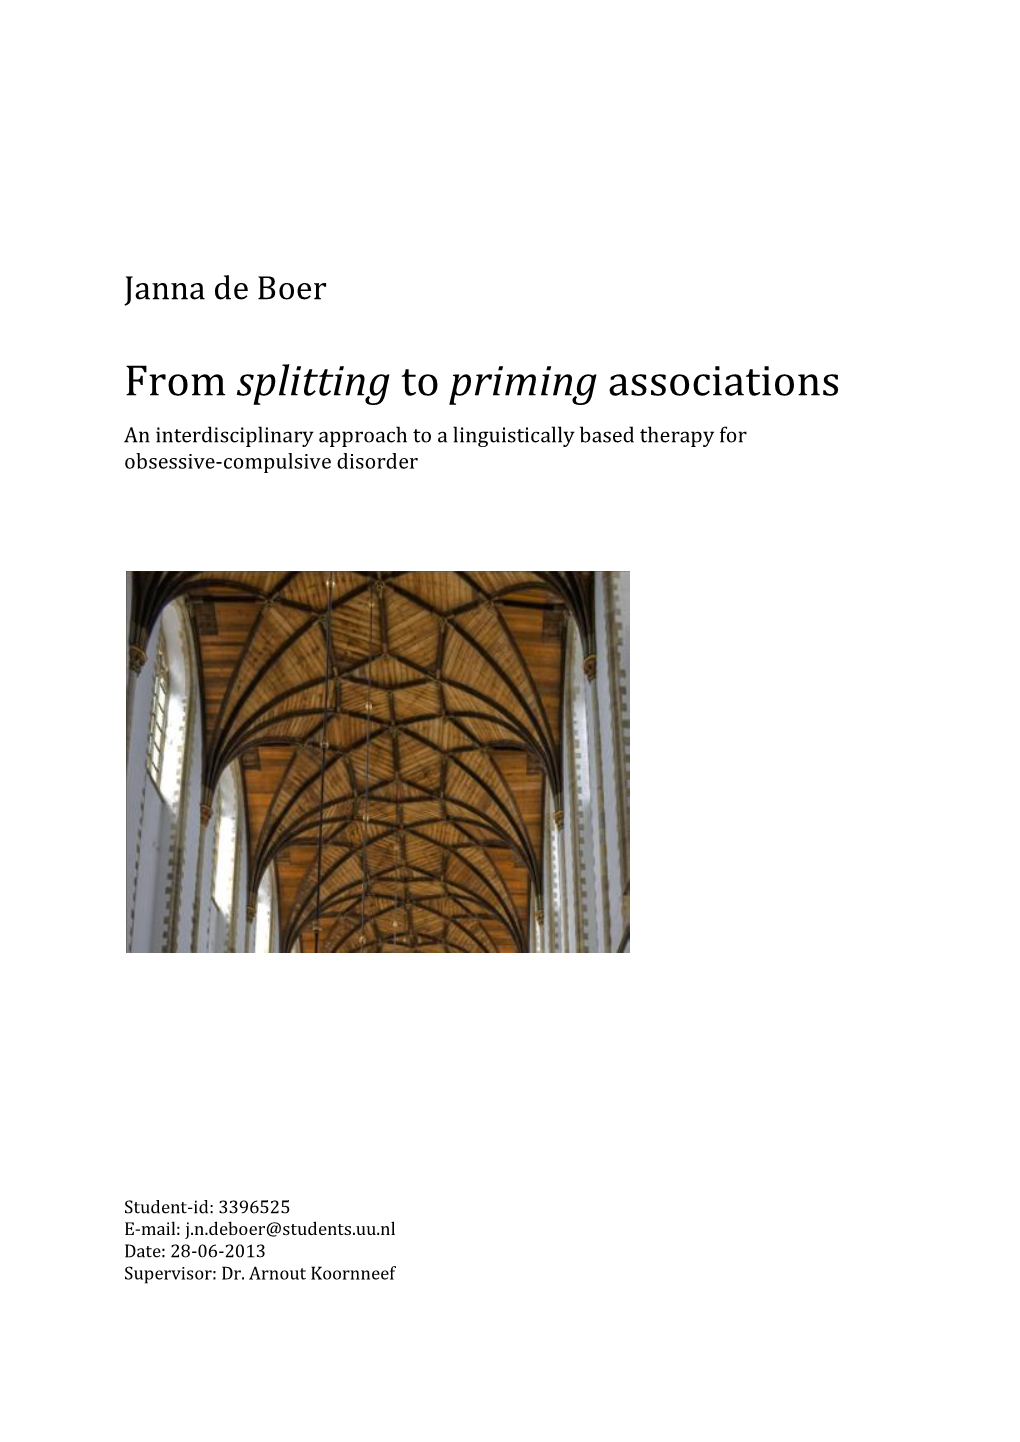 From Splitting to Priming Associations